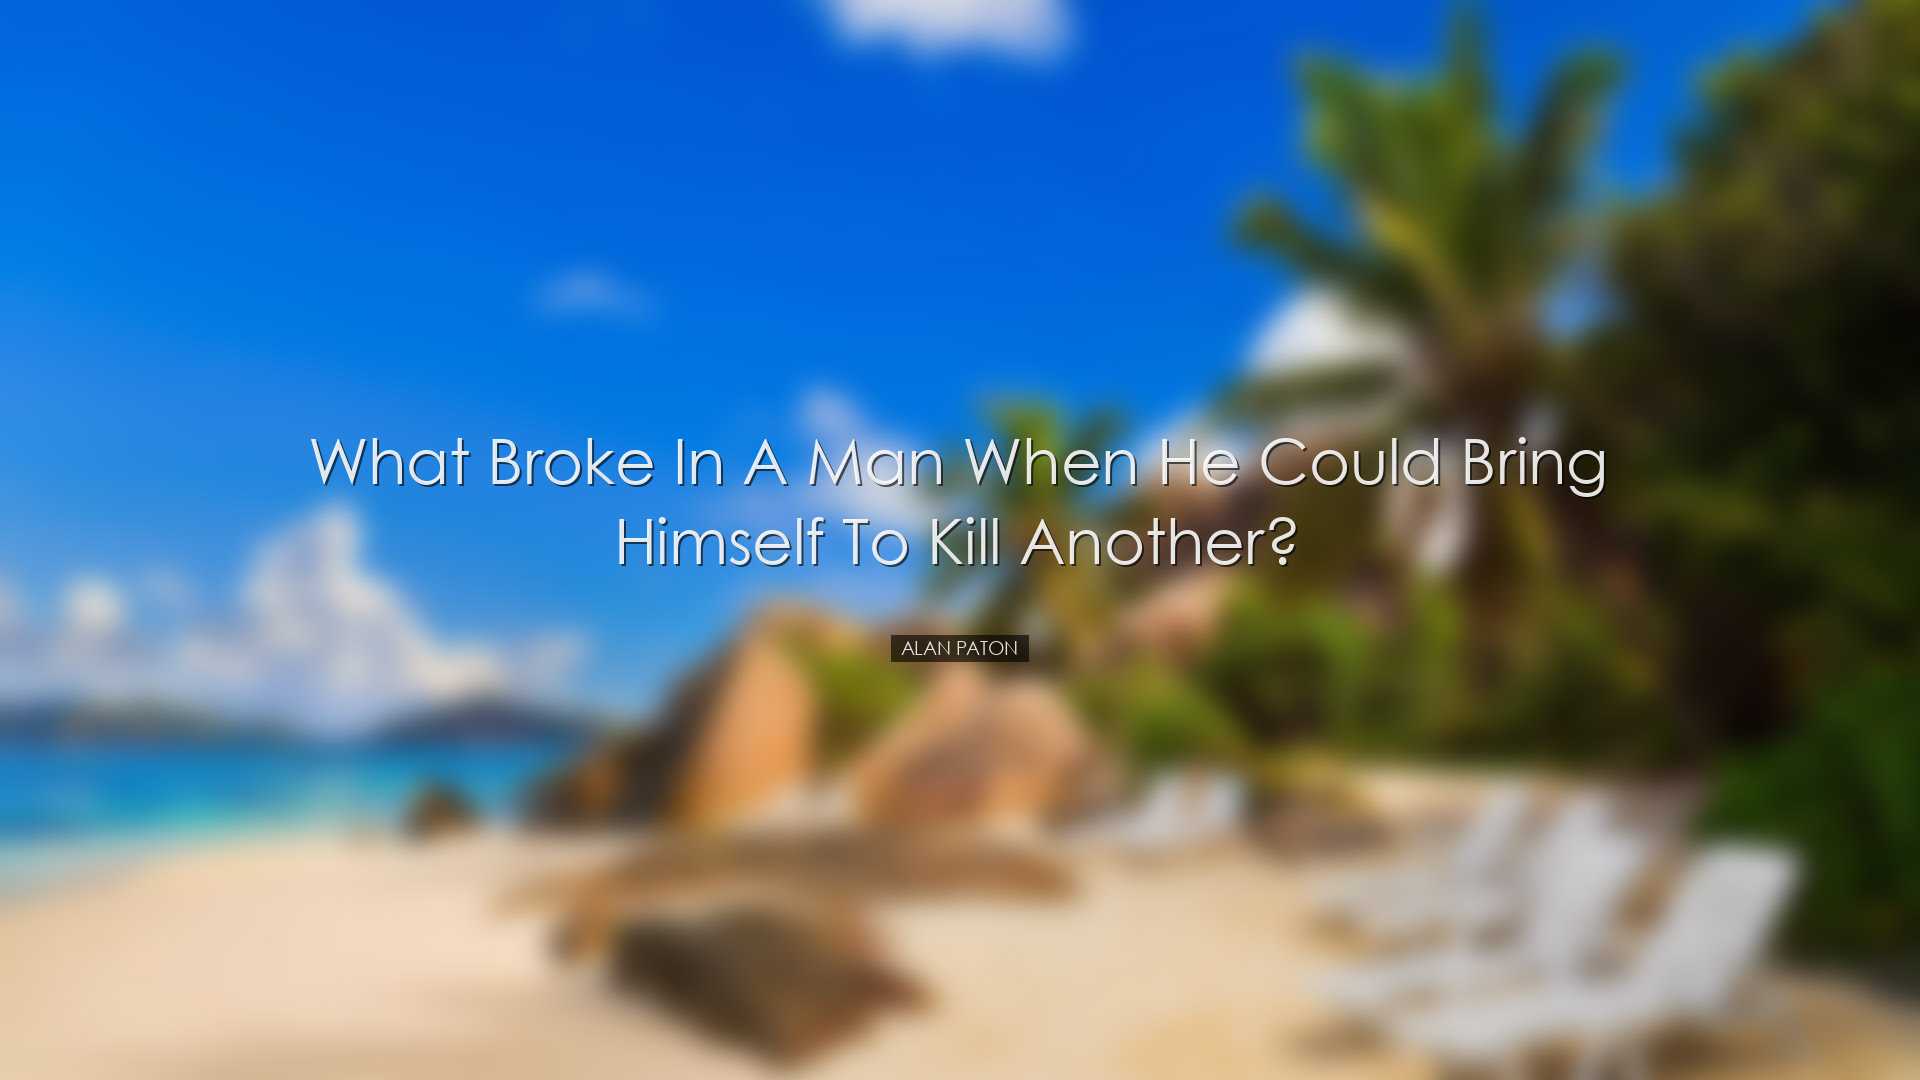 What broke in a man when he could bring himself to kill another? -